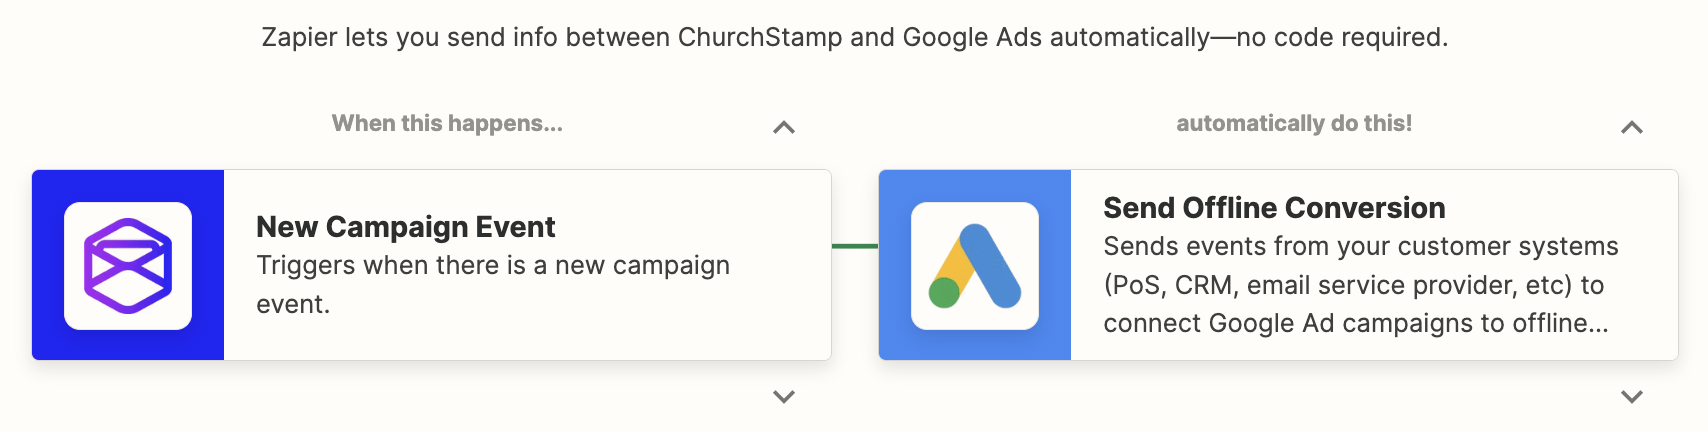 Google Ads Offline Conversions with ChurchStamp